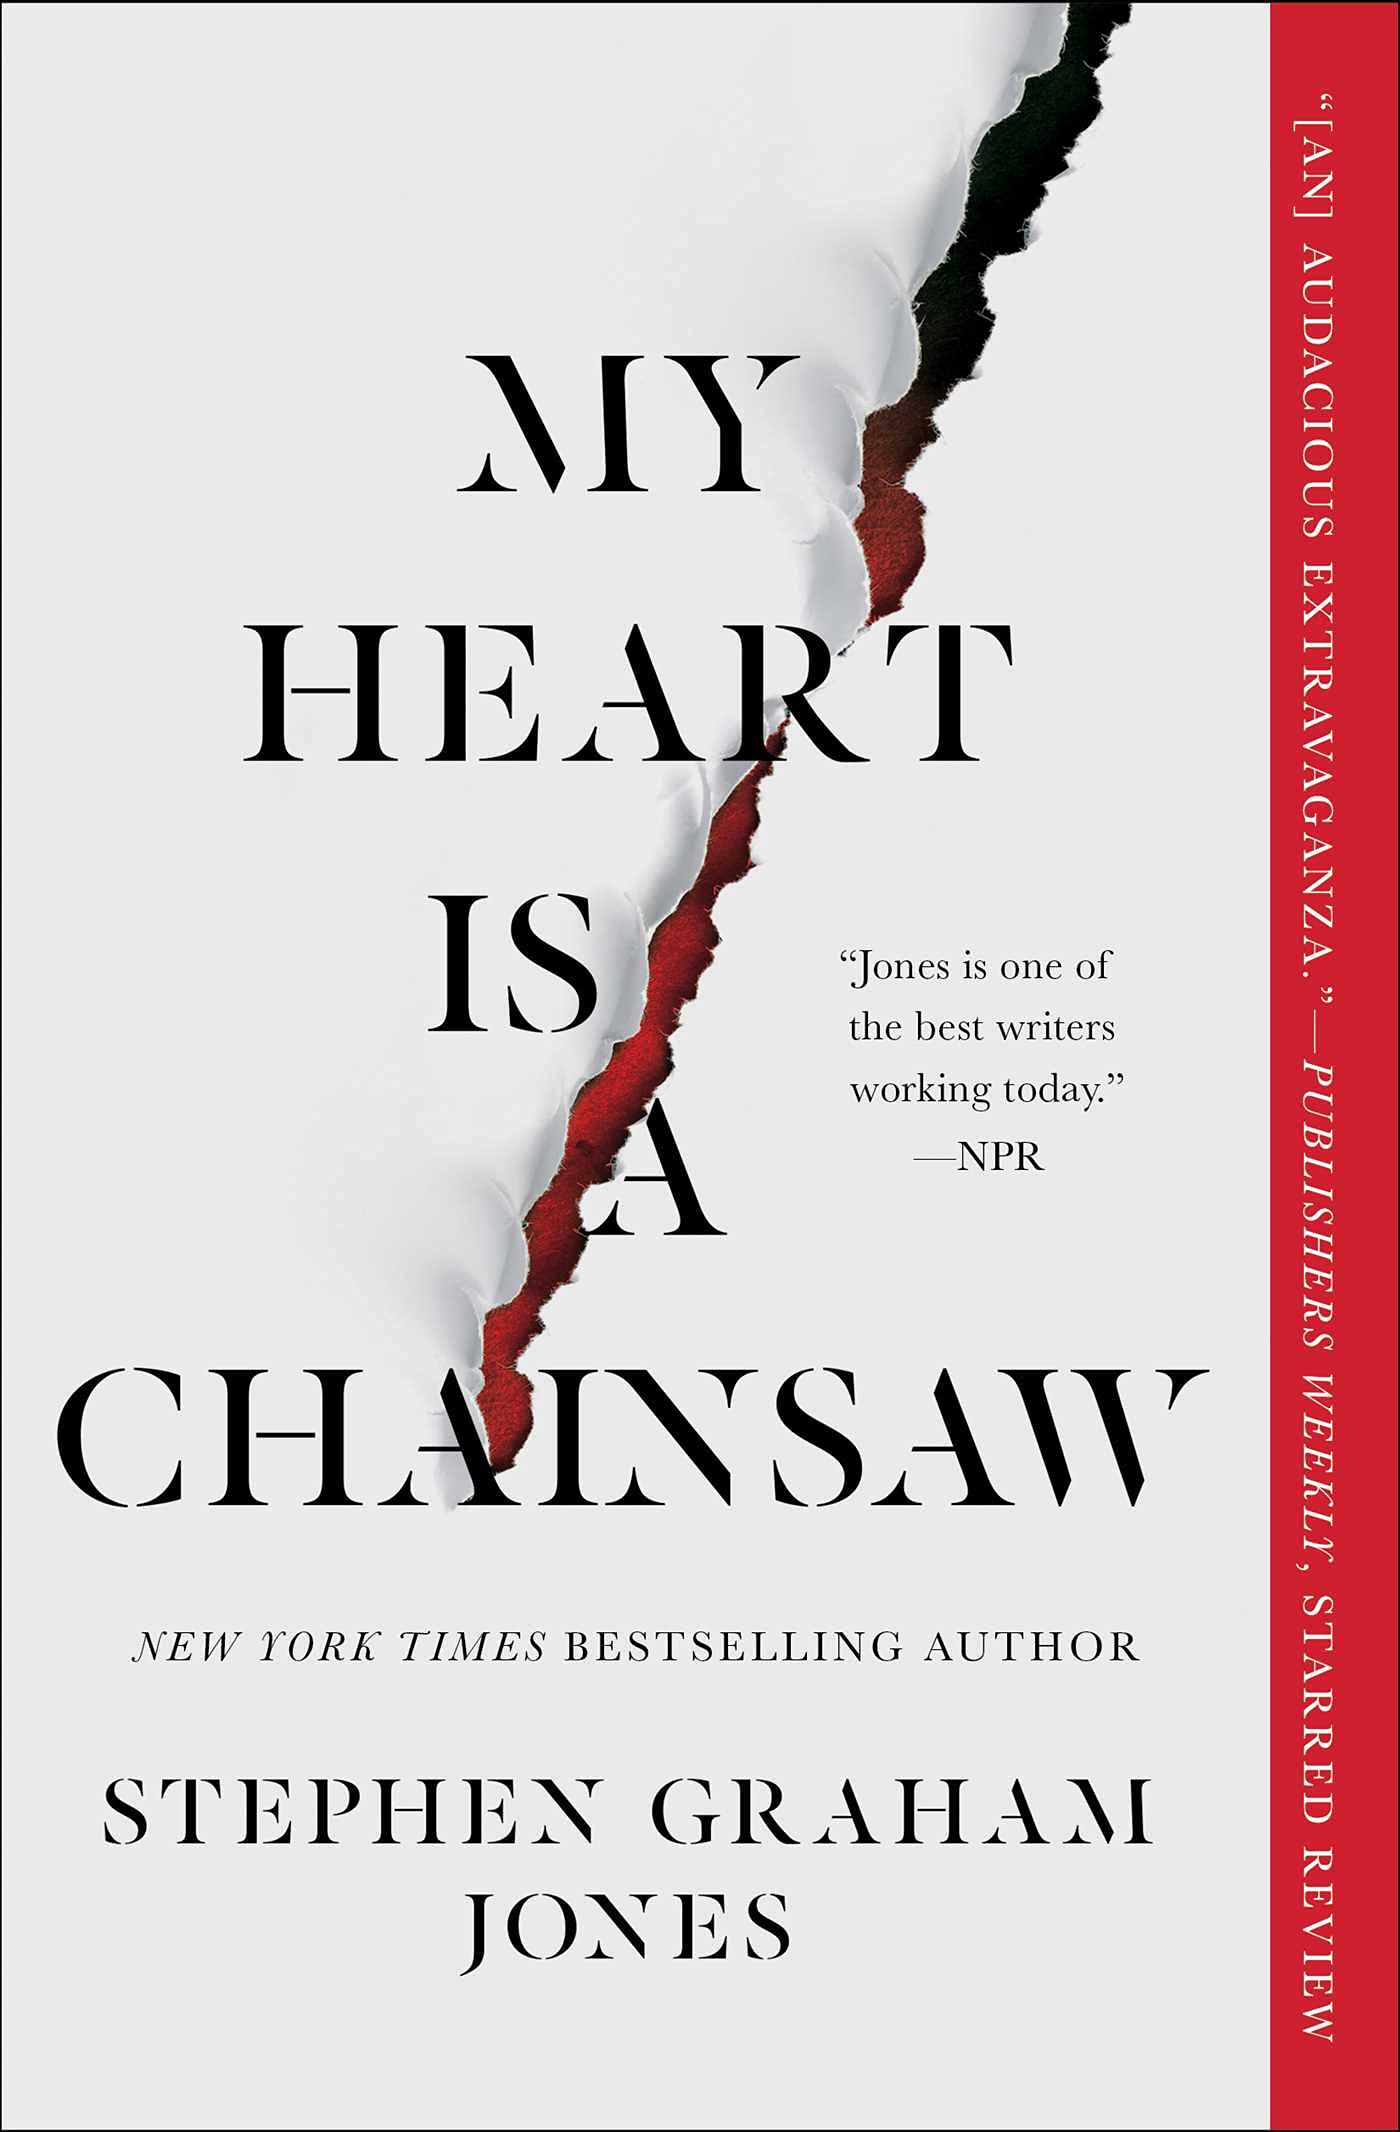 Cover of "My Heart is a Chainsaw" by Stephen Graham Jones